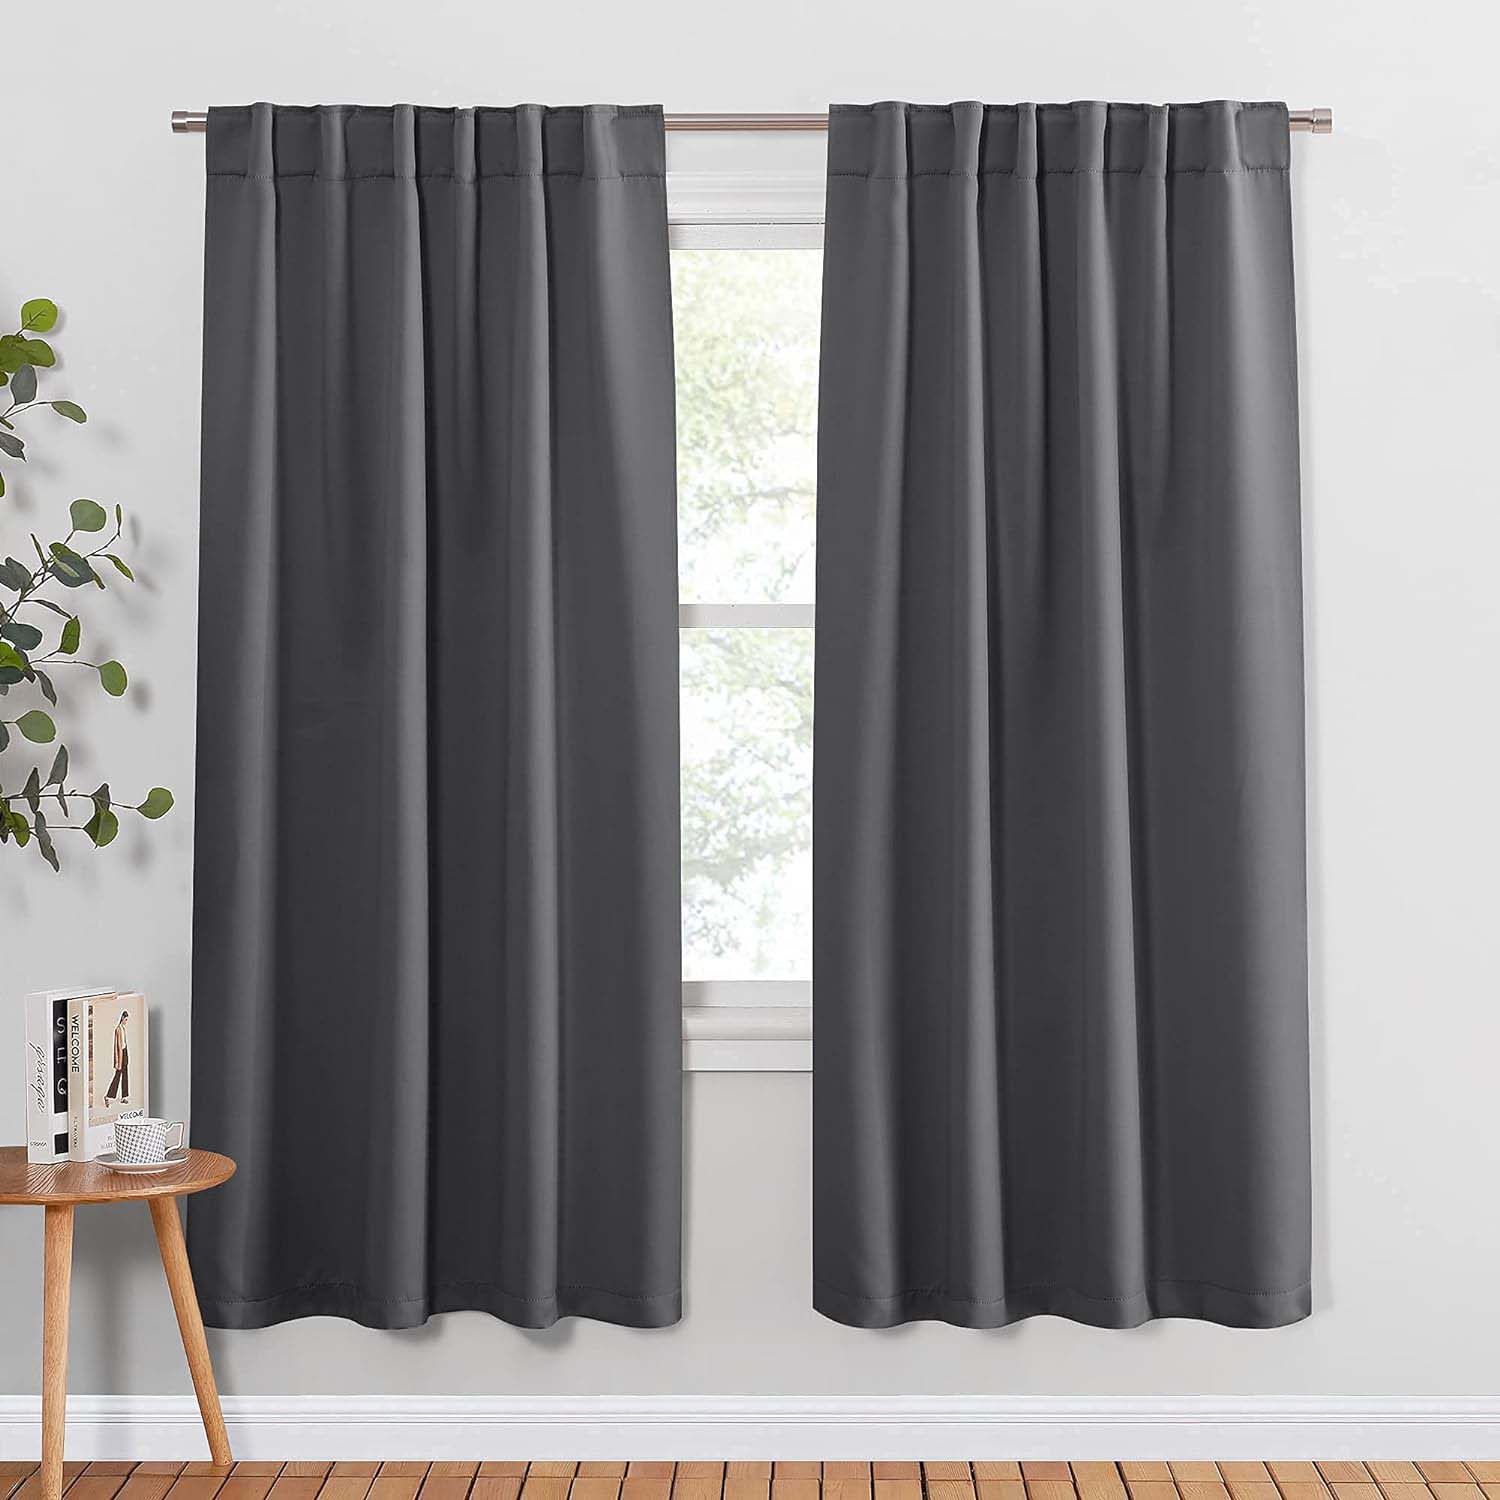 How to Upgrade Your Sleeping Situation Option Pony Dance Blackout Curtains